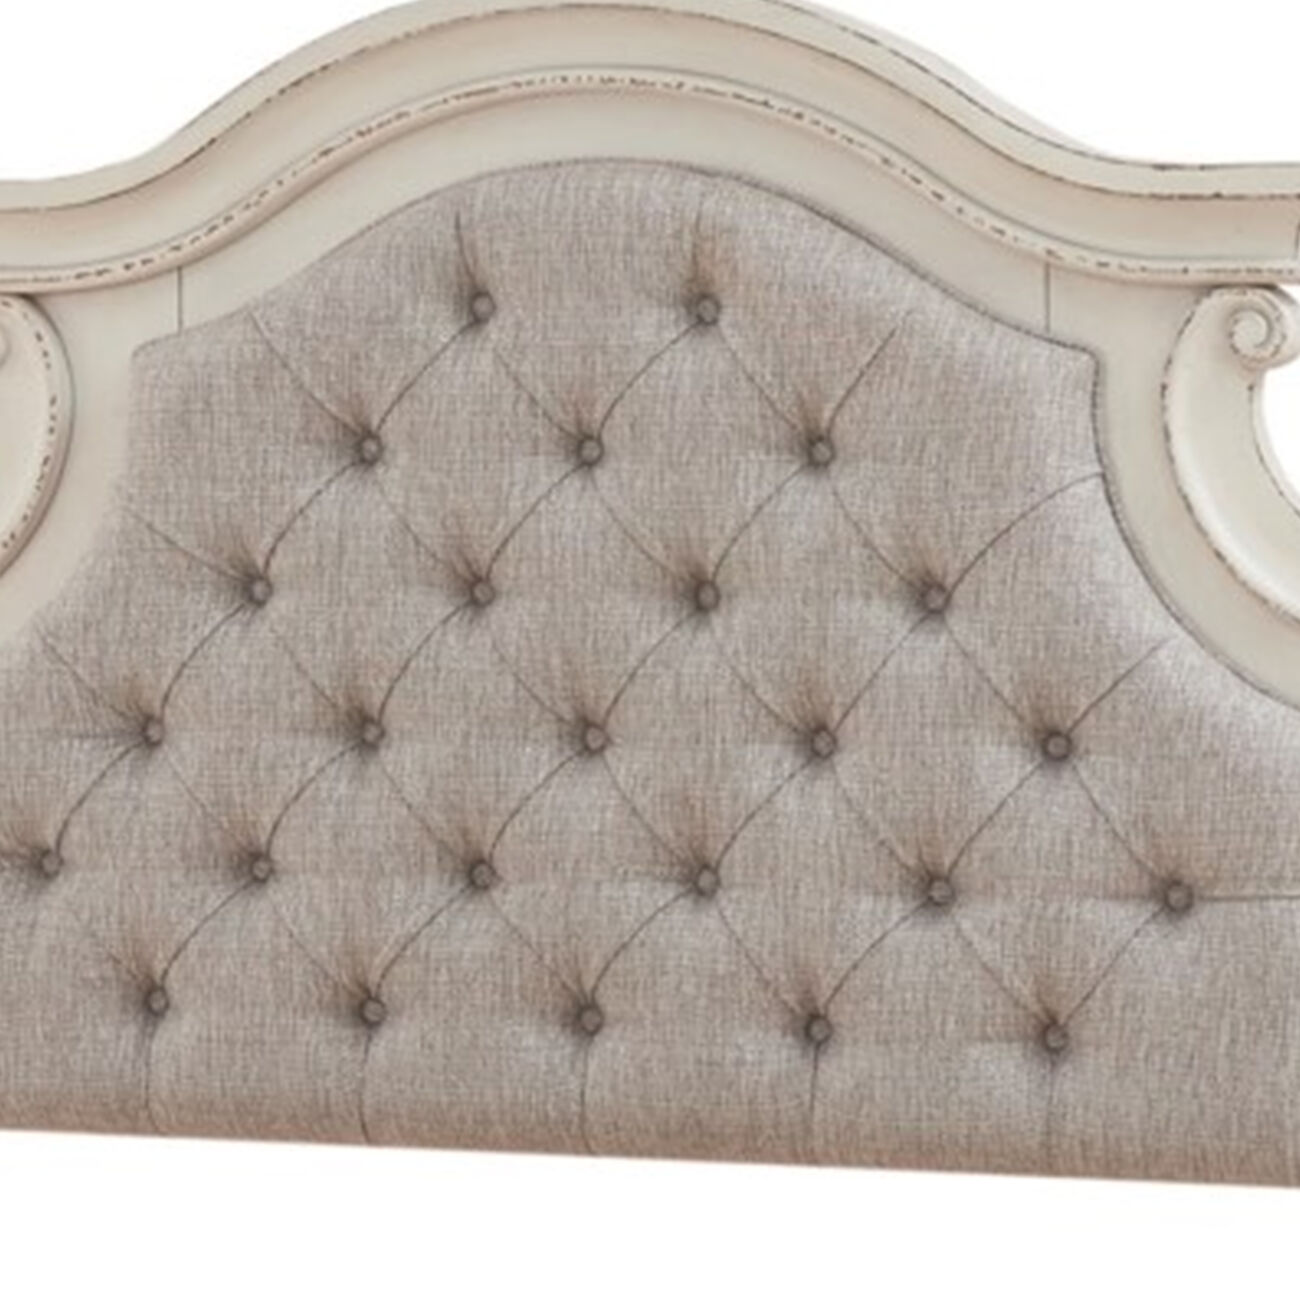 Ornate Queen Panel Headboard with Button Tufting, Beige and Antique White